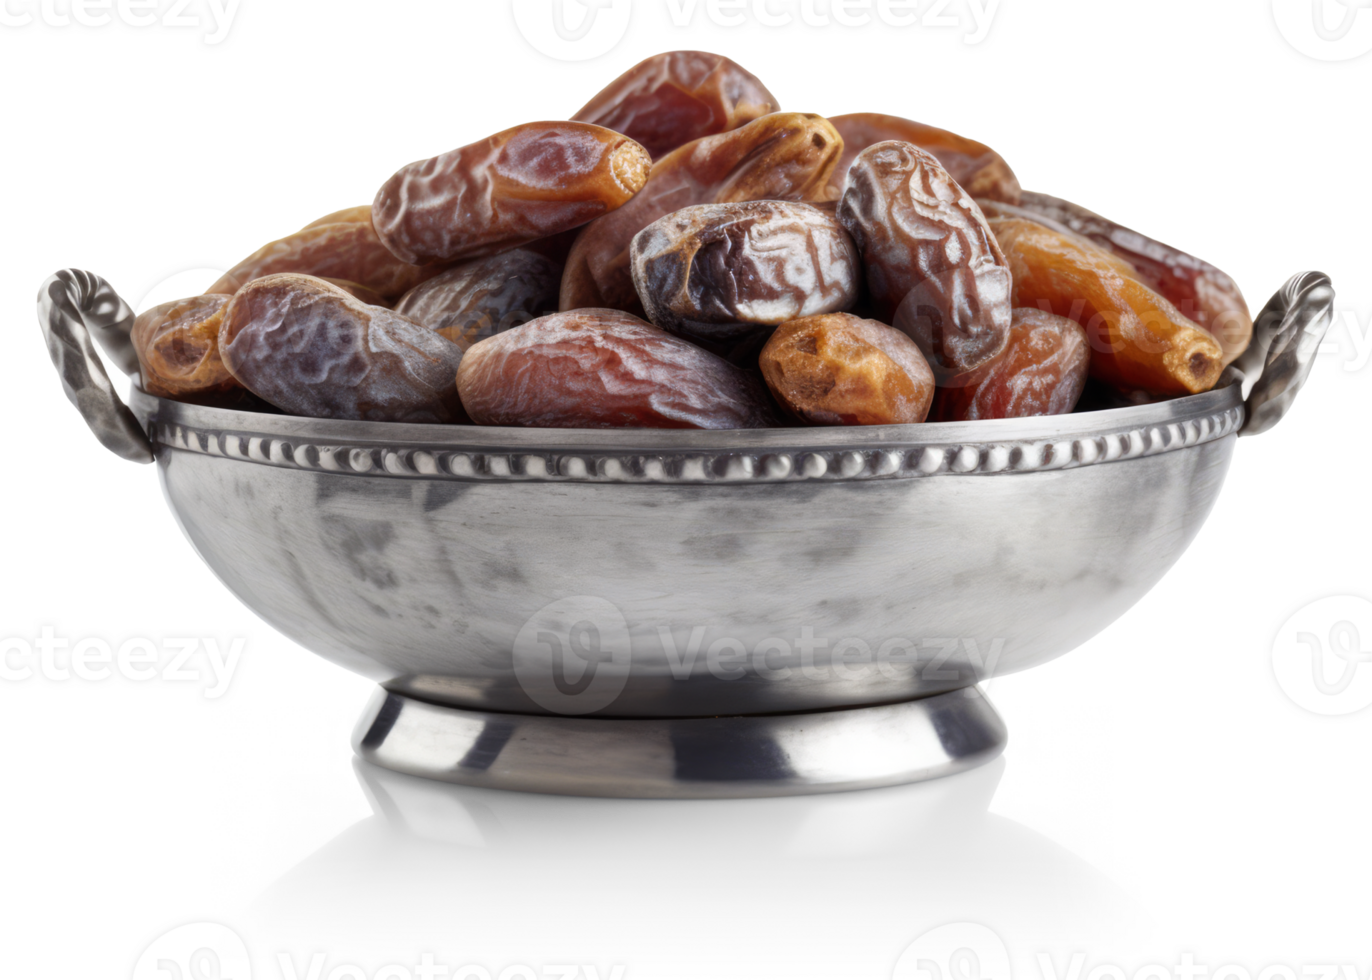 Date Fruits on Silver Bowl - png